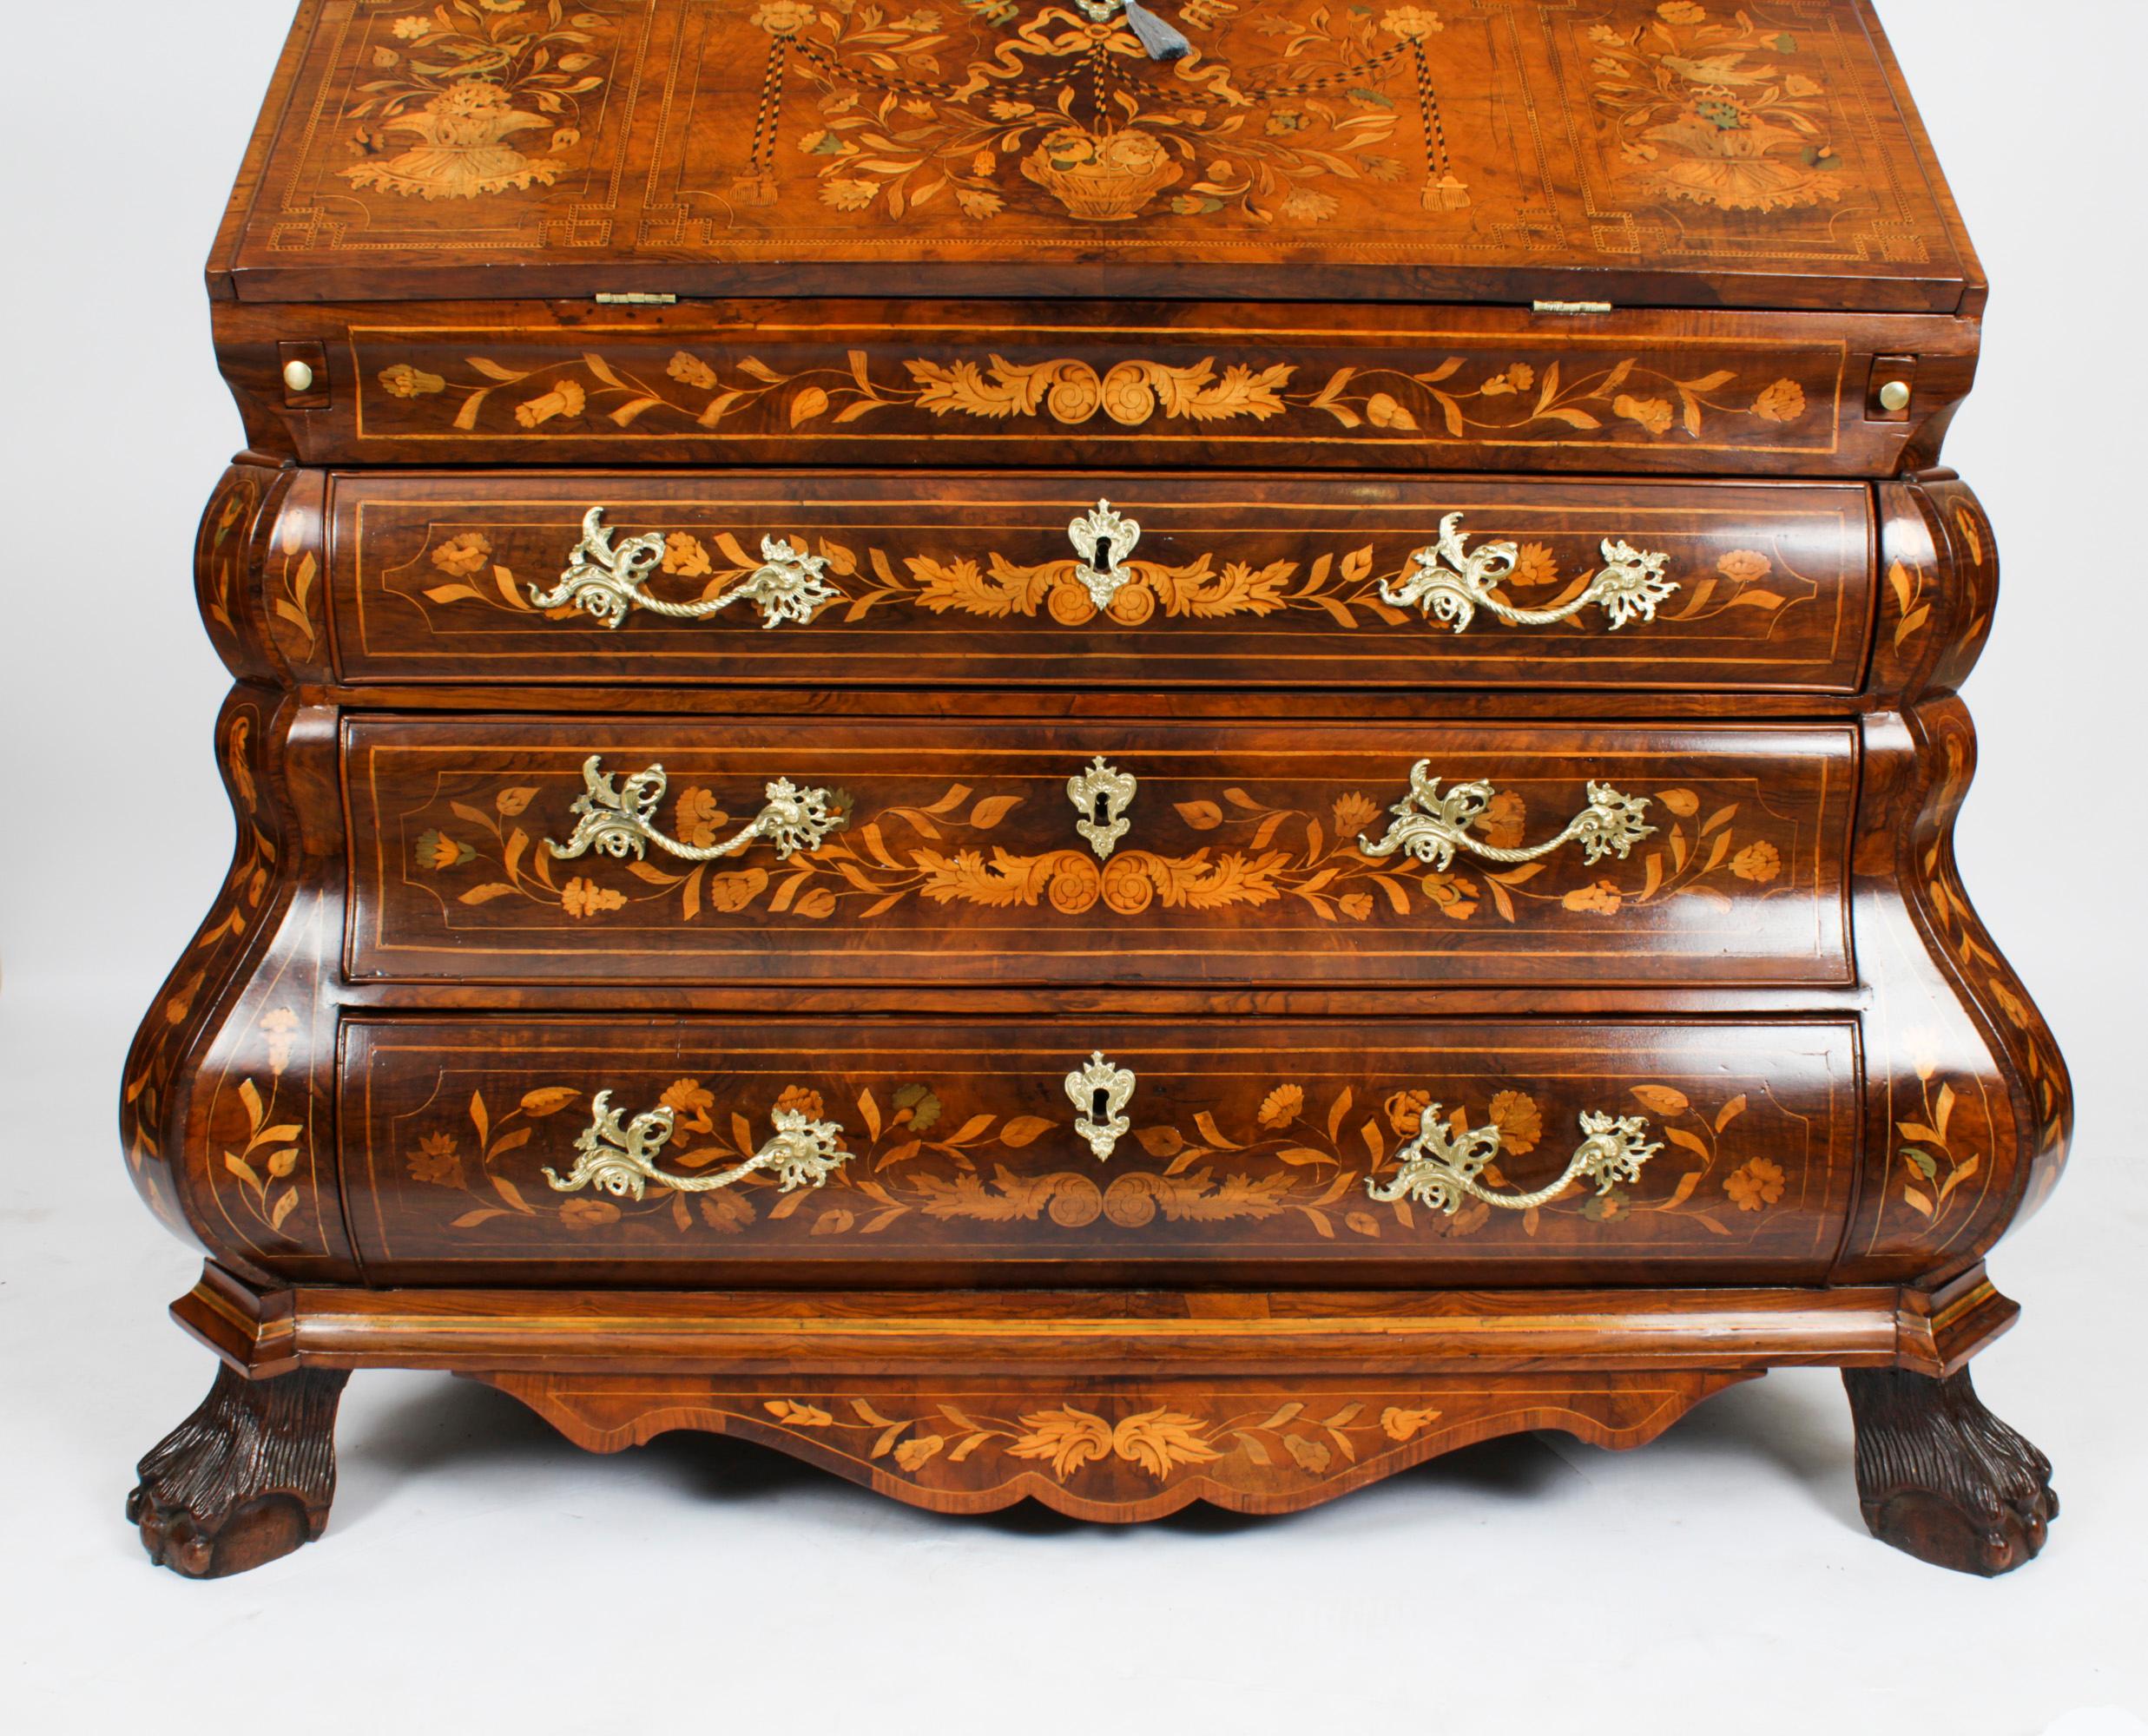 Antique Walnut Dutch Marquetry Bureau Cabinet Bookcase 18th Century In Good Condition For Sale In London, GB